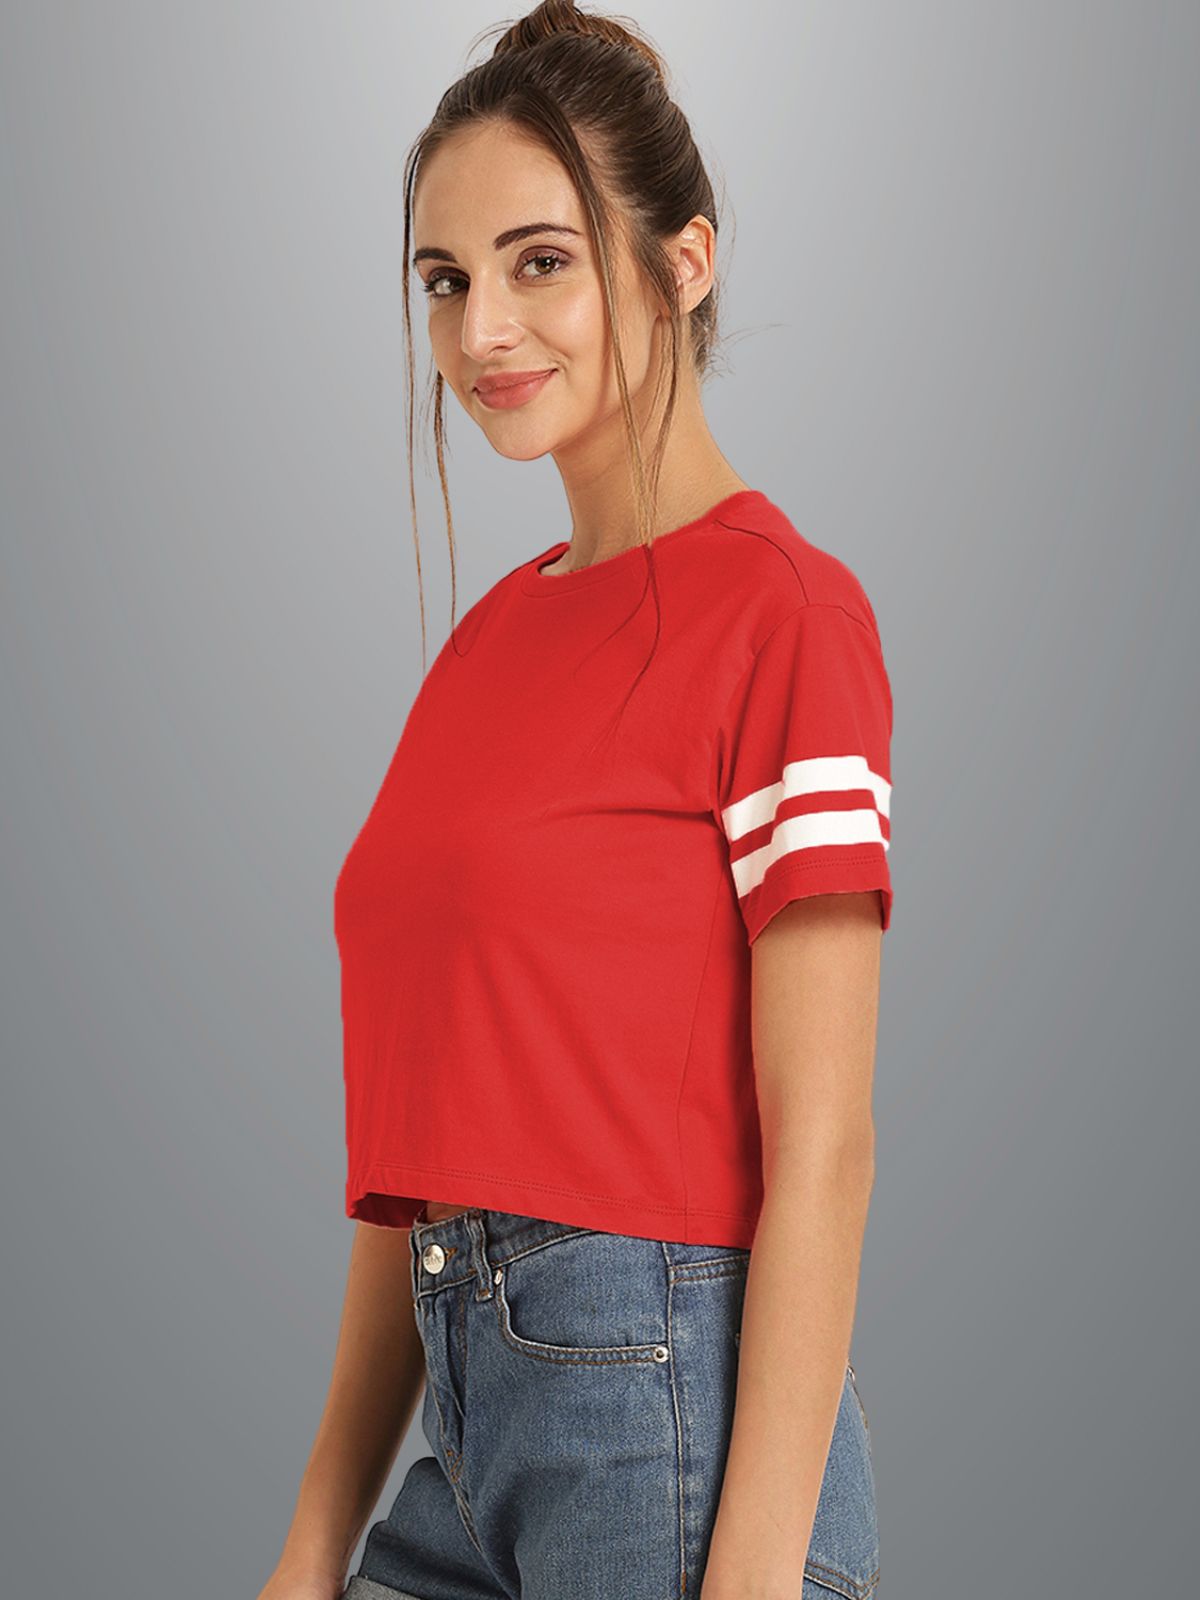 Womens Solid Red Cotton Crop Top With Designer White Stripe